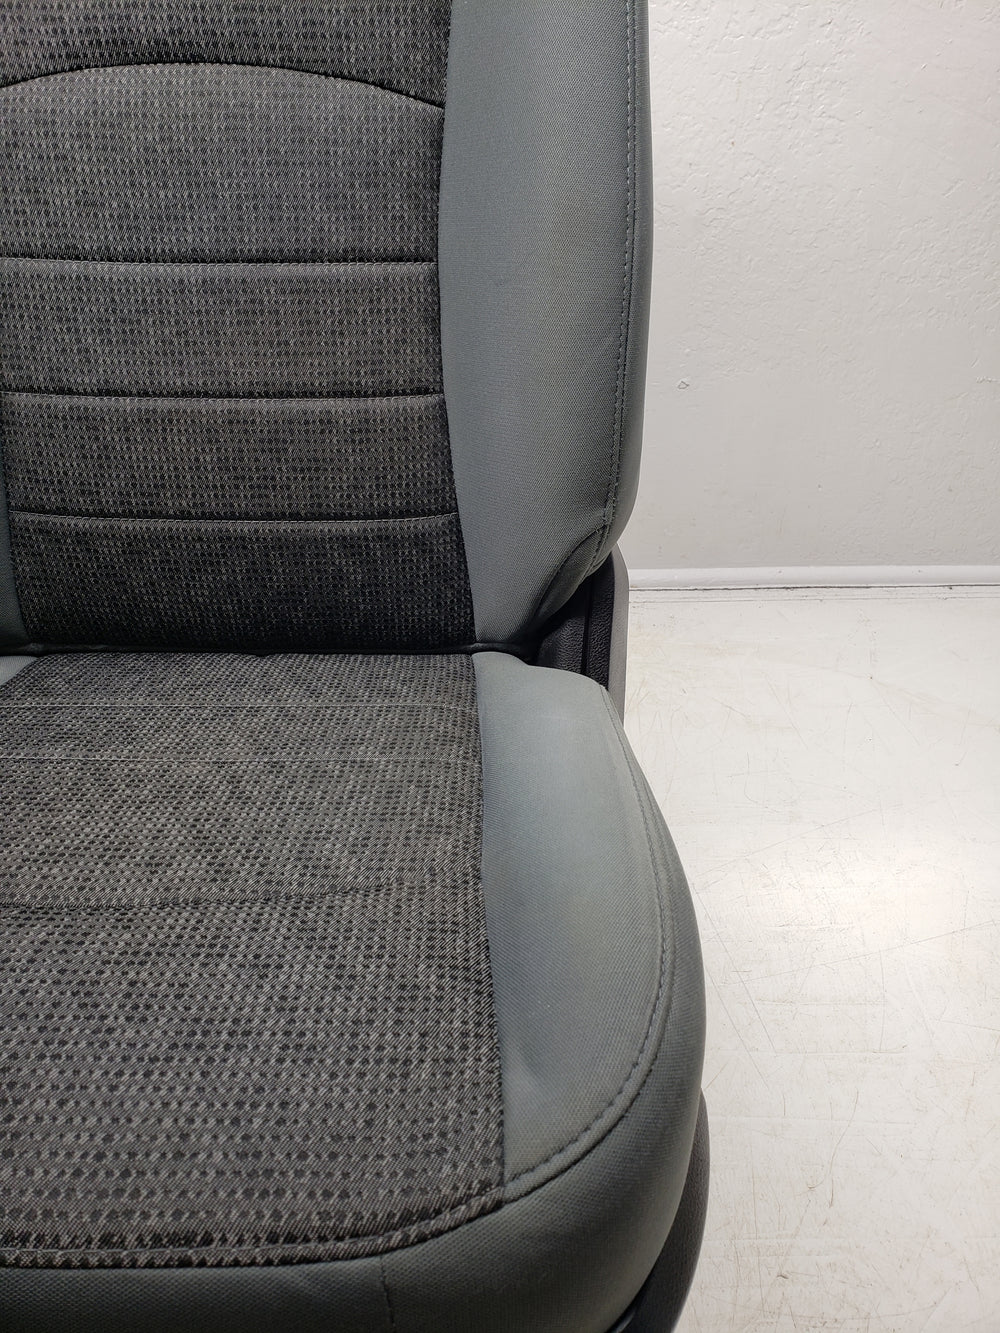 2009 - 2018 Dodge Ram Seats, Gray Cloth, Power Driver, 4th Gen #1308 | Picture # 5 | OEM Seats